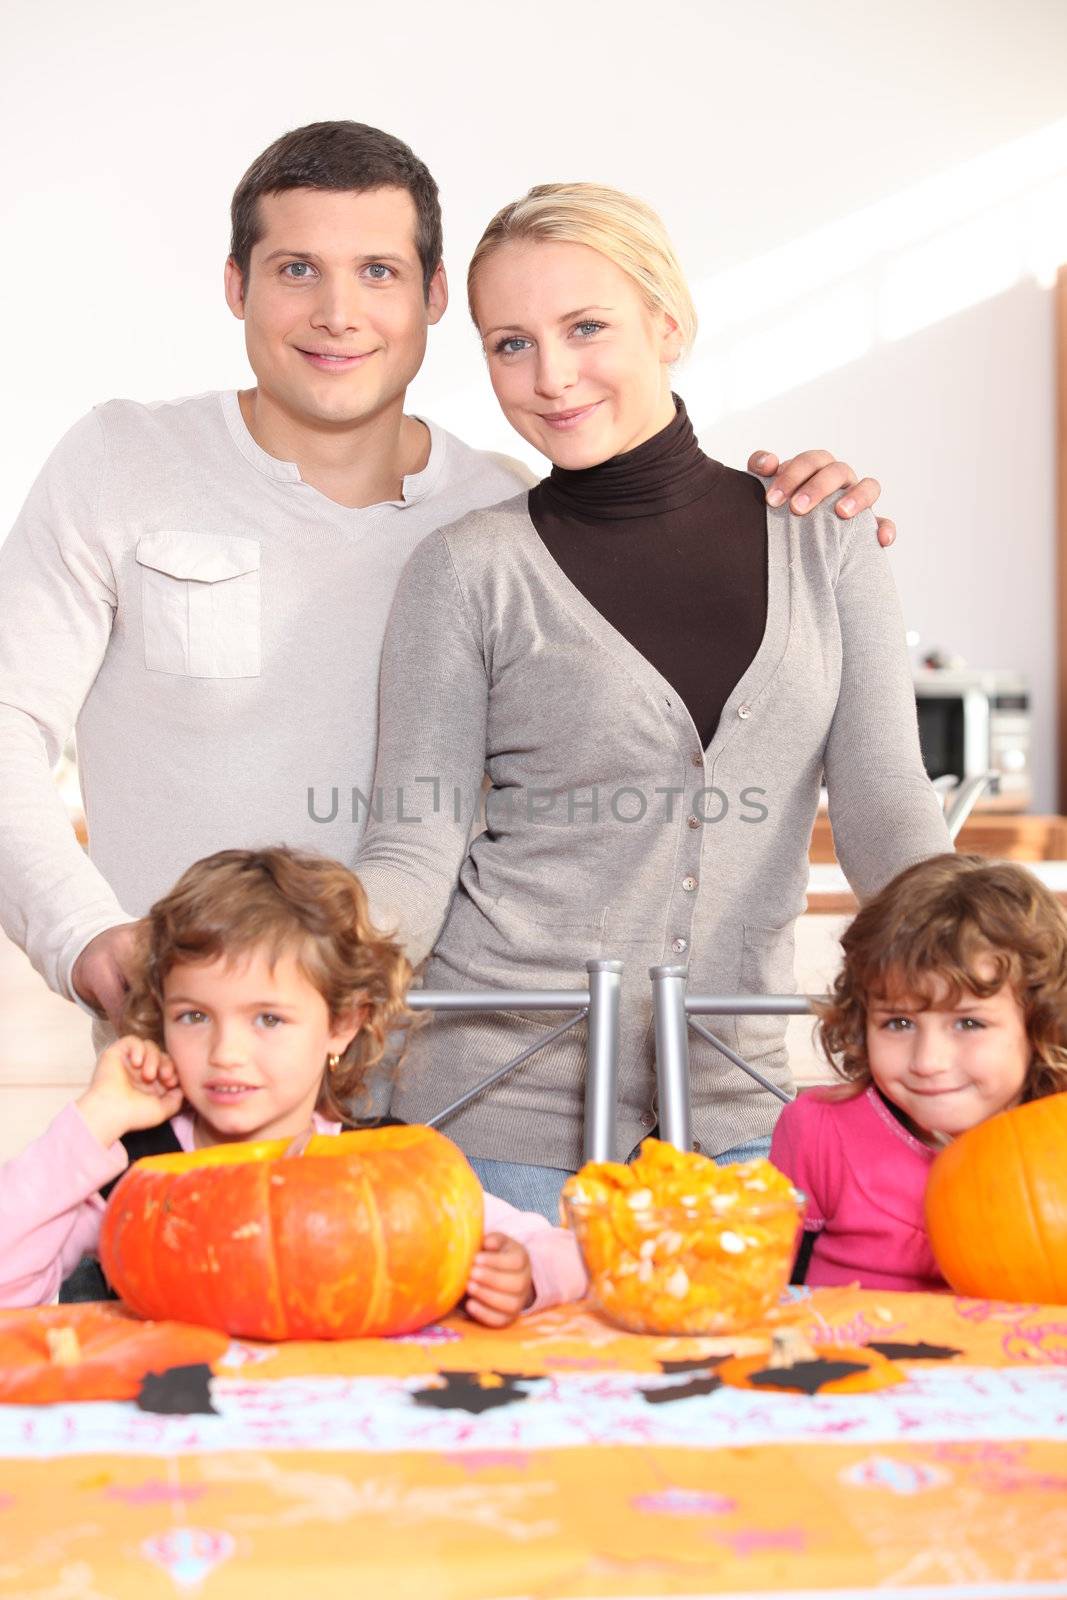 Family gathered around kitchen table preparing pumpkins by phovoir